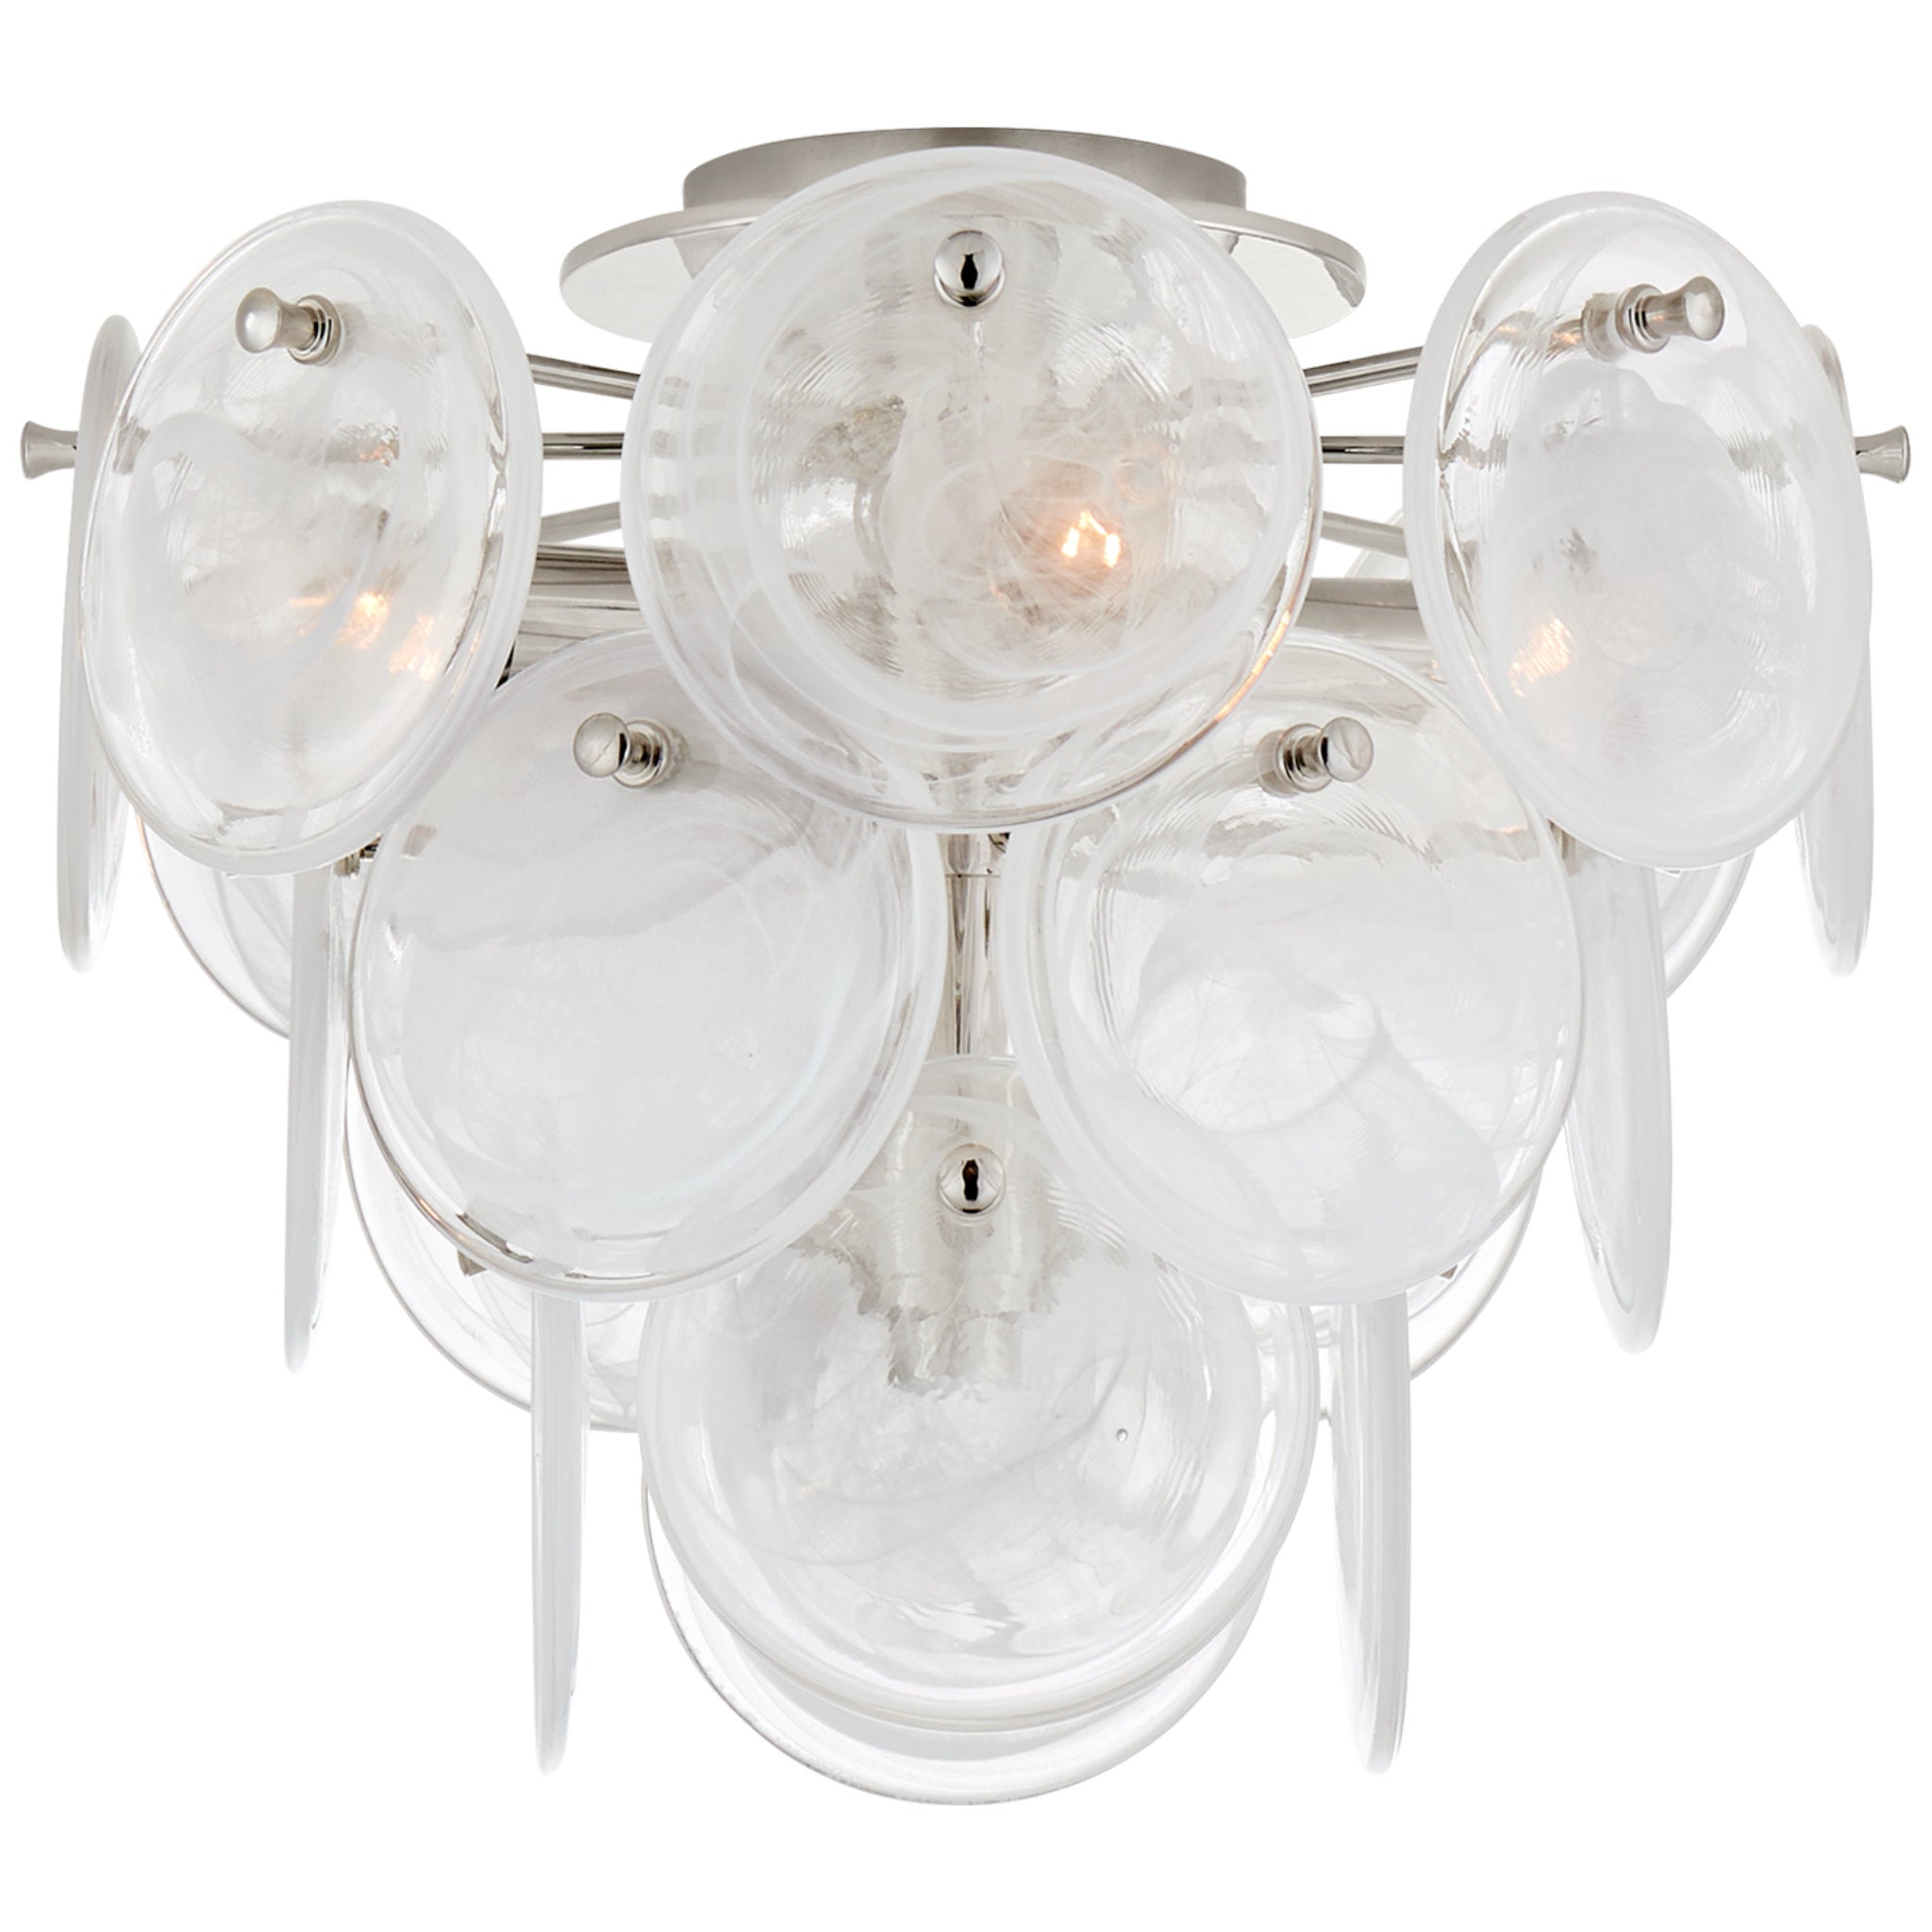 AERIN Loire Medium Tiered Flush Mount in Polished Nickel with White Strie Glass